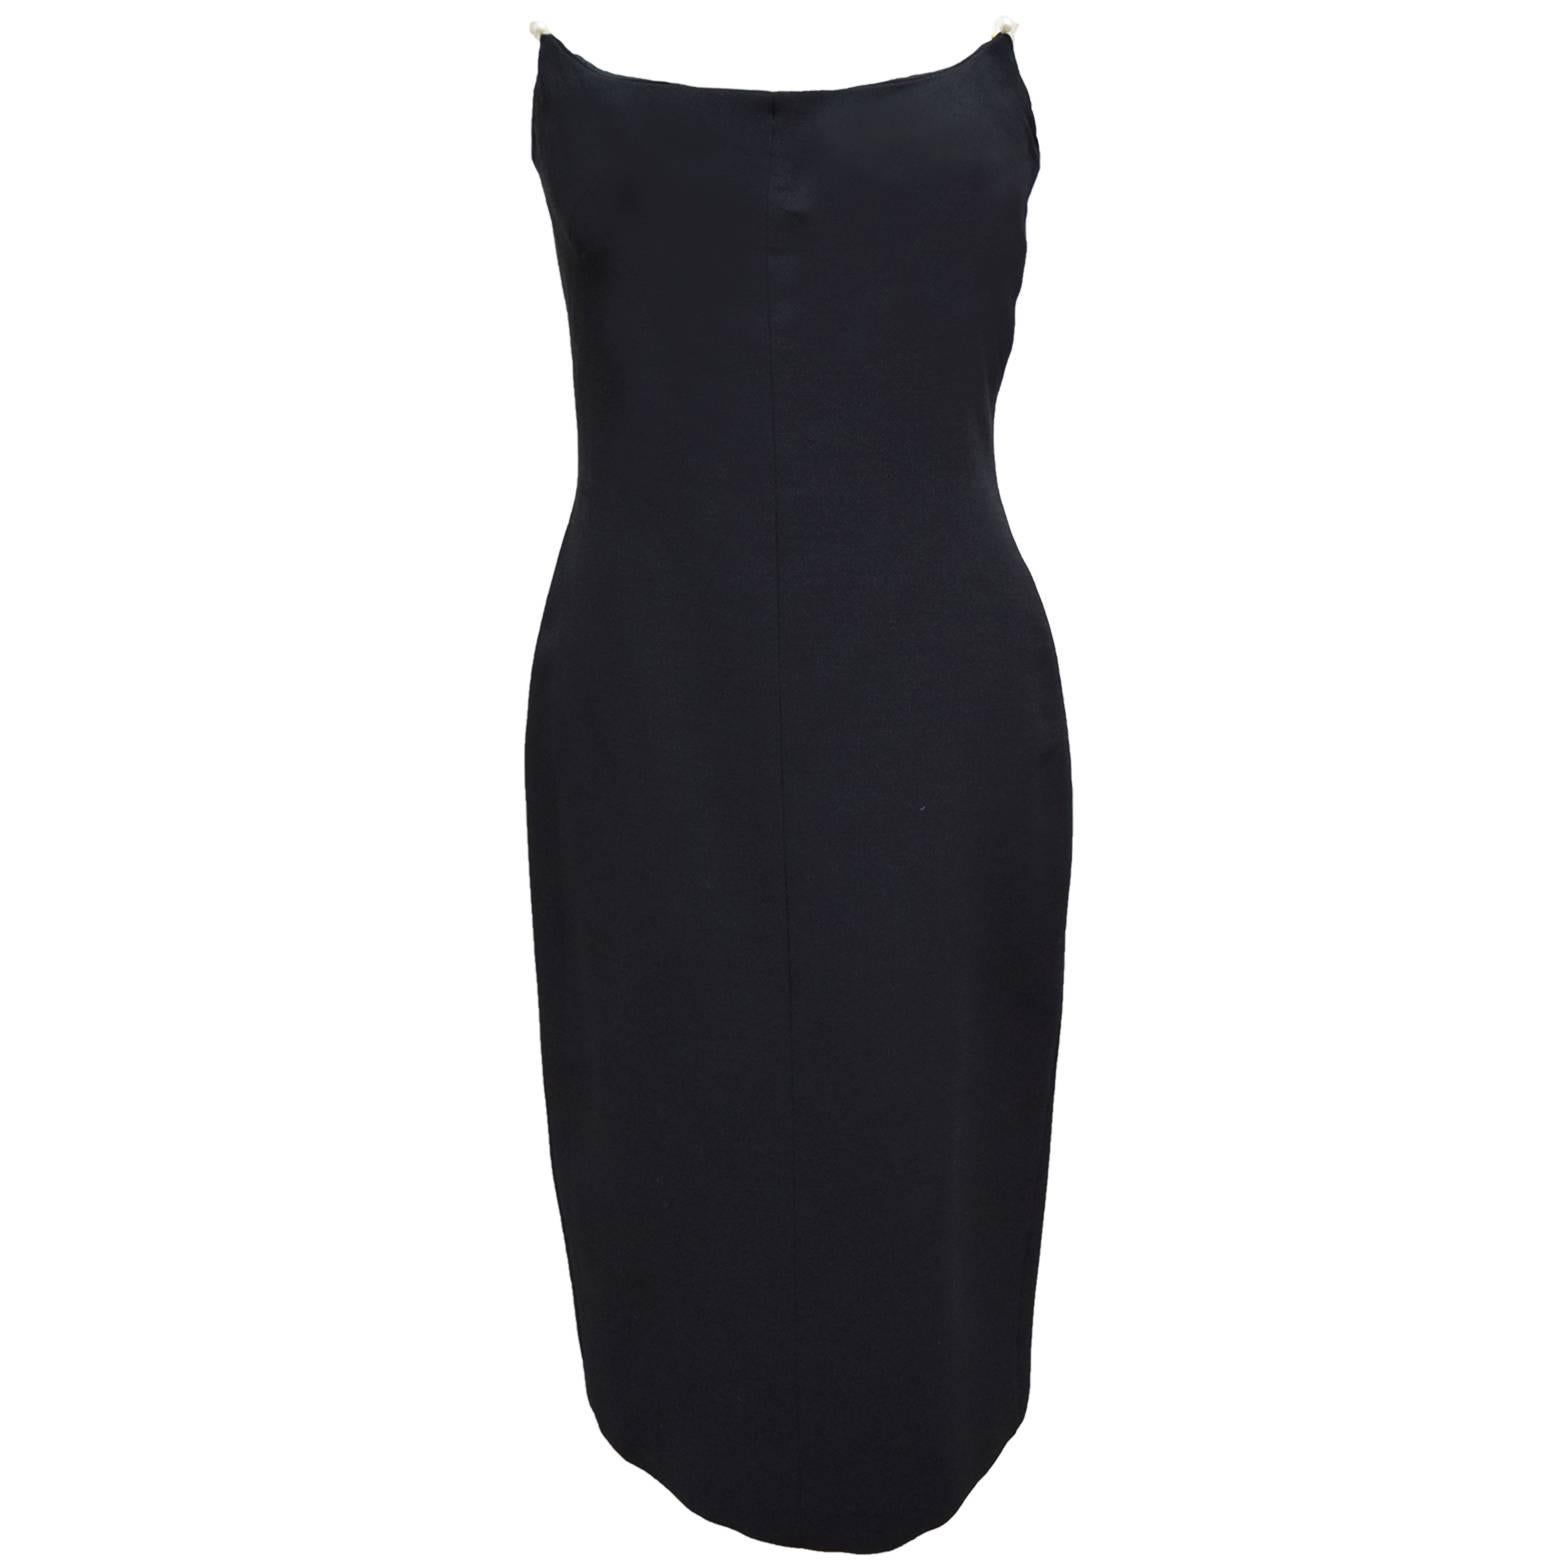 Charles Chang-Lima Wool Black Strapless Cocktail Dress with Freshwater Pearls For Sale